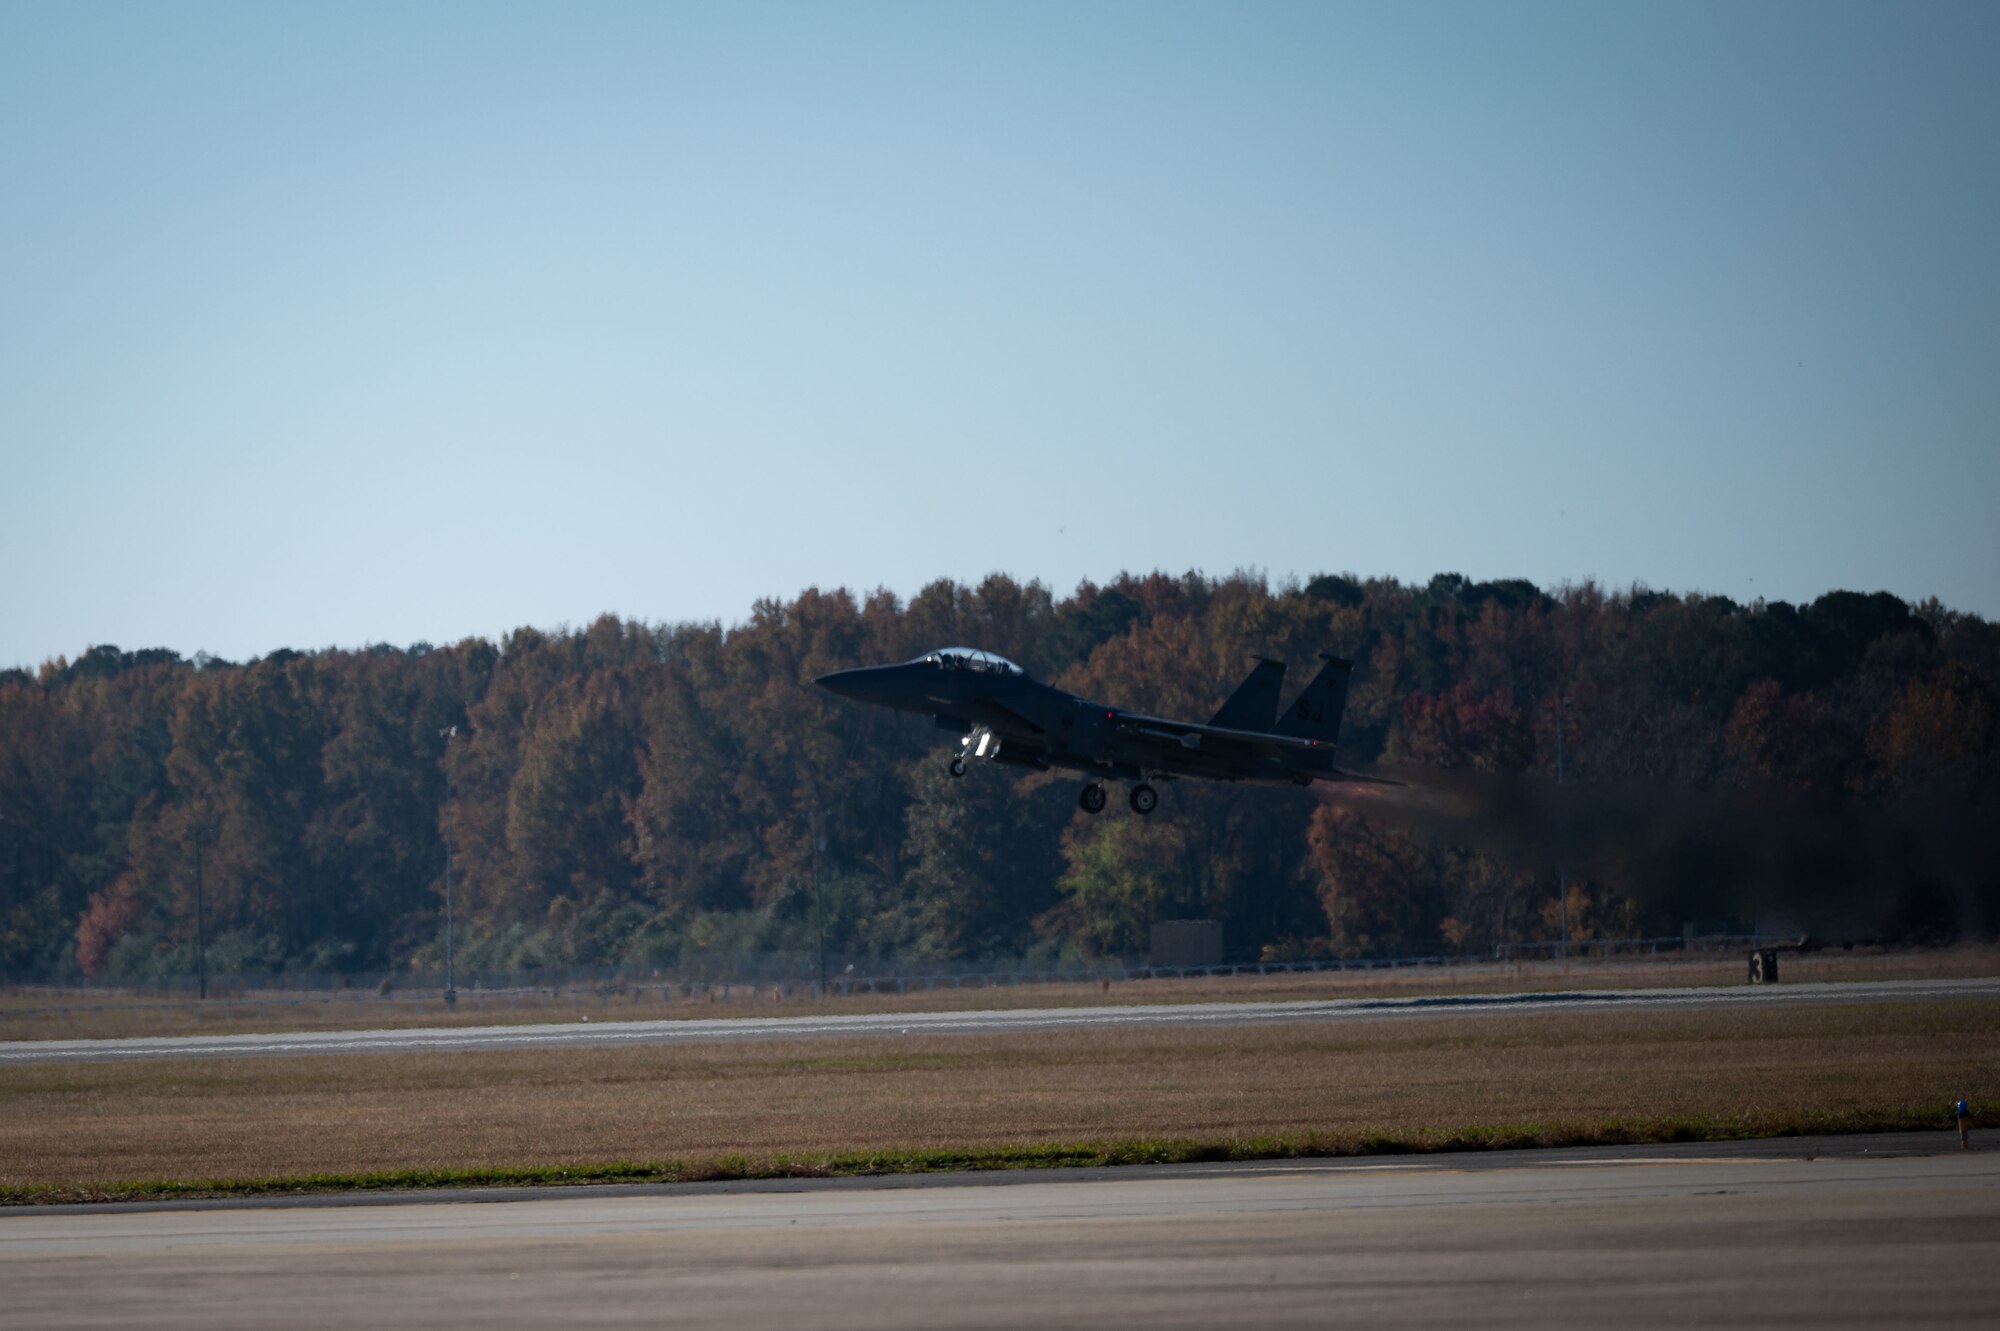 An F-15E Strike Eagle from the 335th Fighter Generation Squadron takes off as a part of Razor Talon at Seymour Johnson Air Force Base, North Carolina, Nov. 16, 2021. Razor Talon is a large force exercise that takes place on the East Coast of the United States. (U.S. Air Force photo by Senior Airman David Lynn)